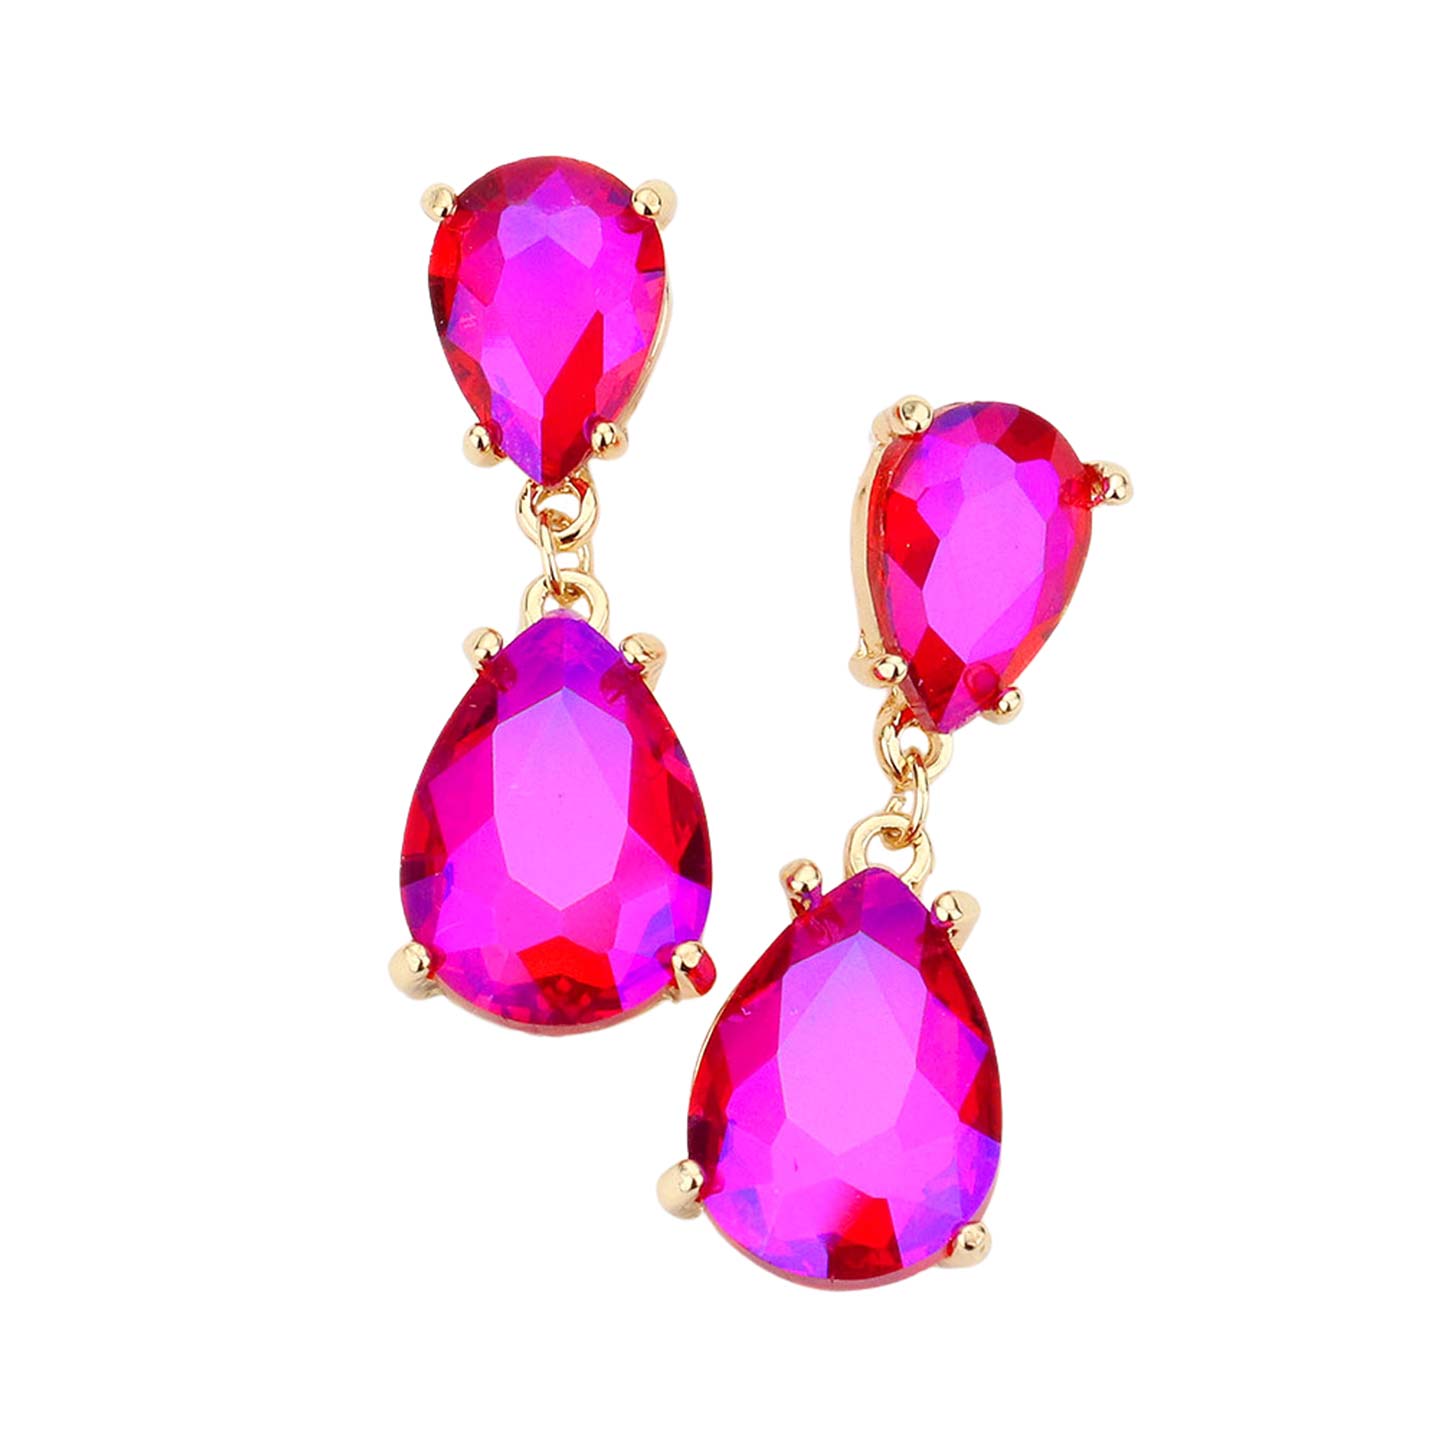 Fuchsia Double Teardrop Link Dangle Evening Earrings, Beautiful teardrop-shaped dangle drop earrings. These elegant, comfortable earrings can be worn all day to dress up any outfit. Wear a pop of shine to complete your ensemble with a classy style. The perfect accessory for adding just the right amount of shimmer and a touch of class to special events. Jewelry that fits your lifestyle and makes your moments awesome!